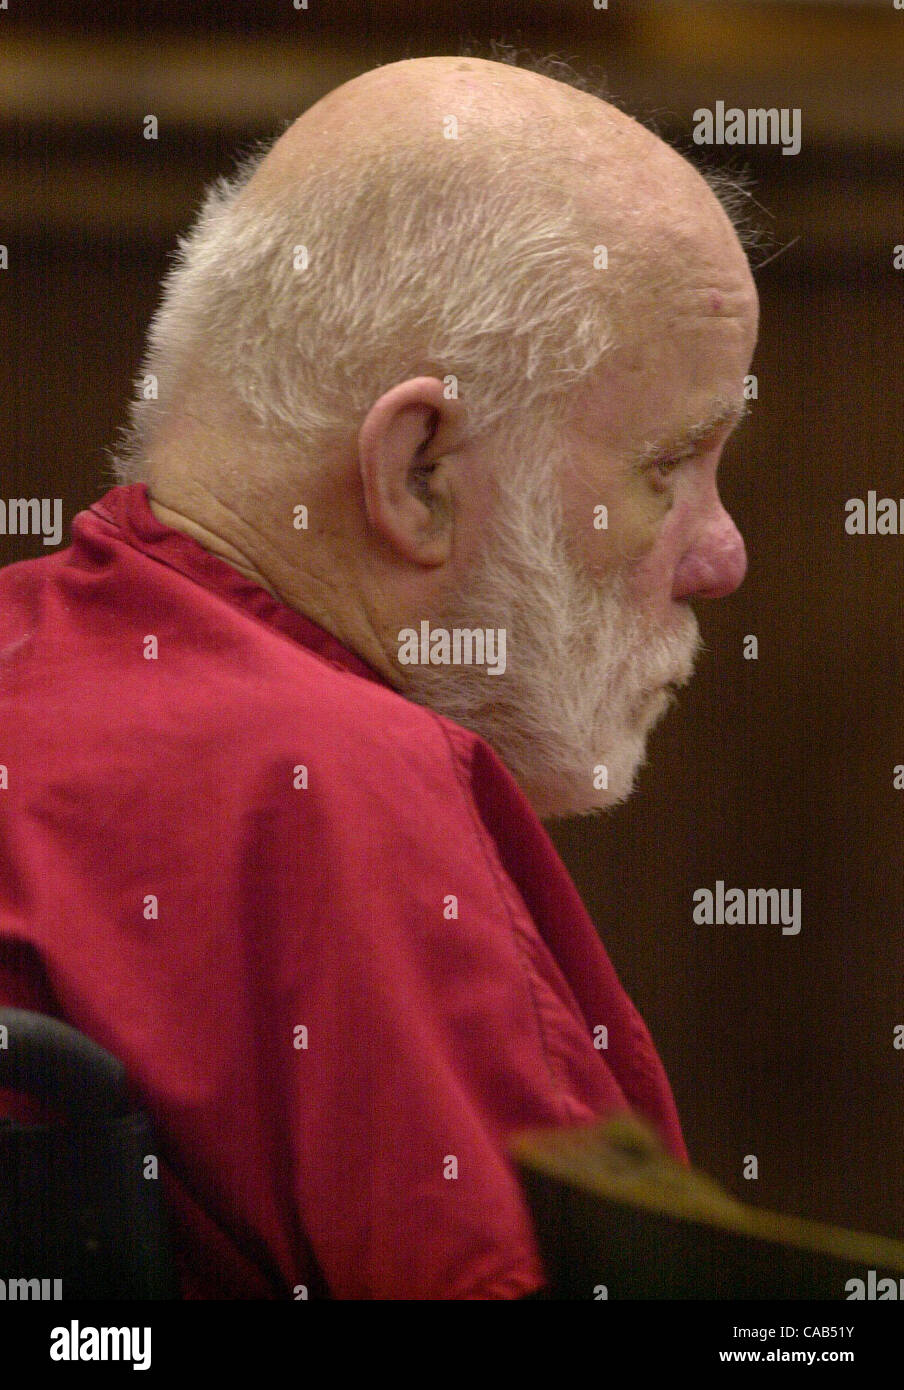 Convicted child molester and kidnapper Kenneth Parnell, 73, receives the maximum sentences of 25 years to life and a fine of $15,000 in Department 4 of Judge             courtroom in the Alameda County  Superior Court House, Thursday, April 15, 2004 in Oakland, Calif.  (Contra Costa Times/Susan Trip Stock Photo